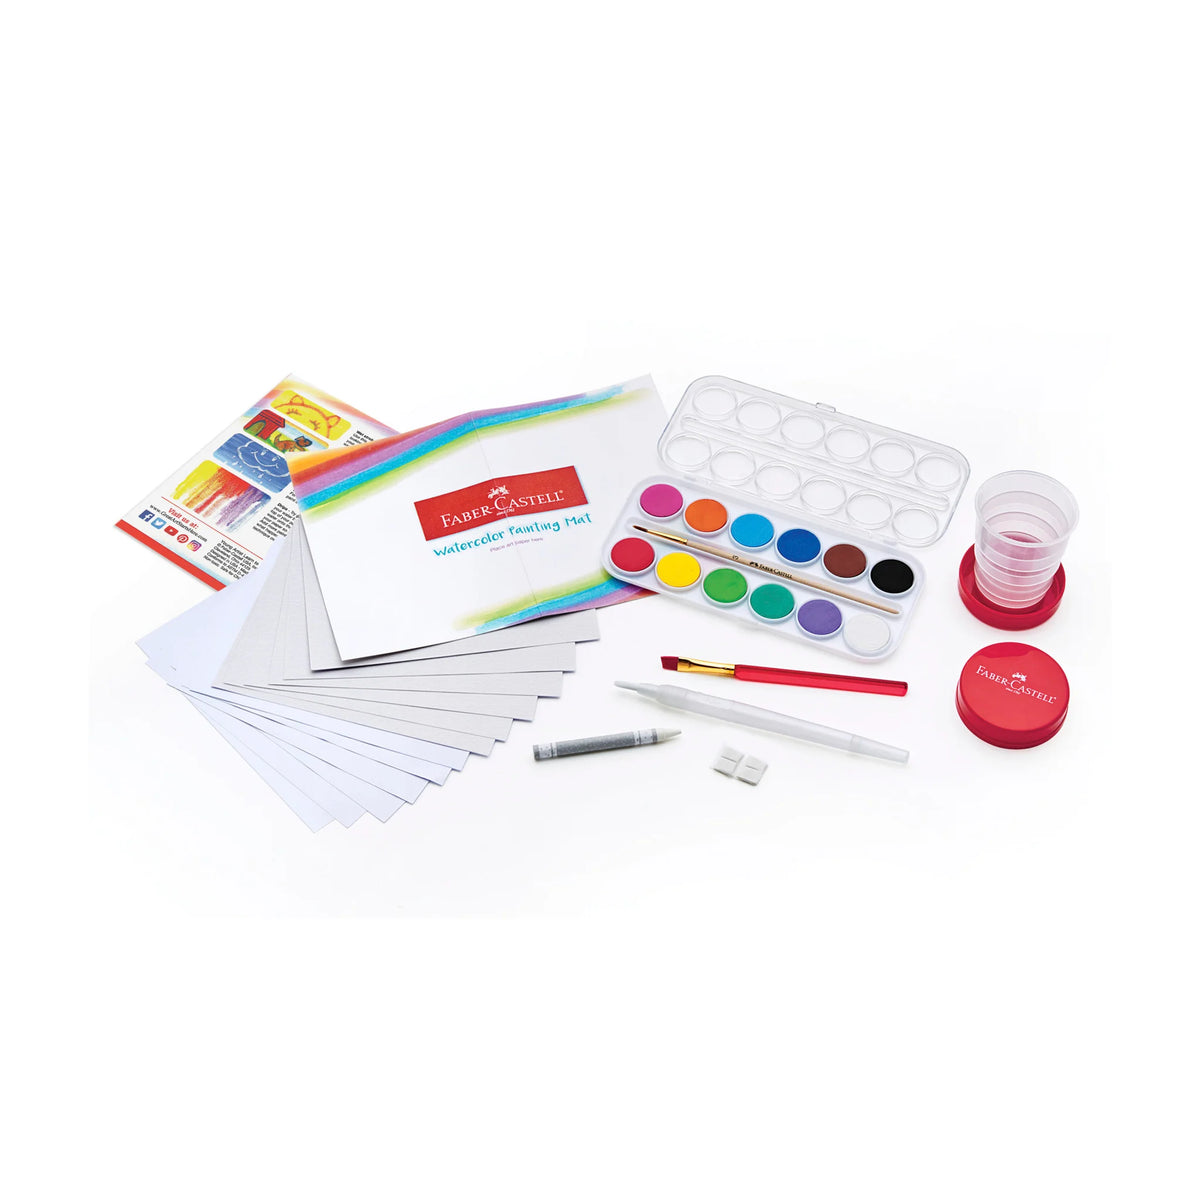 Faber-Castell - Learn to Watercolour Set